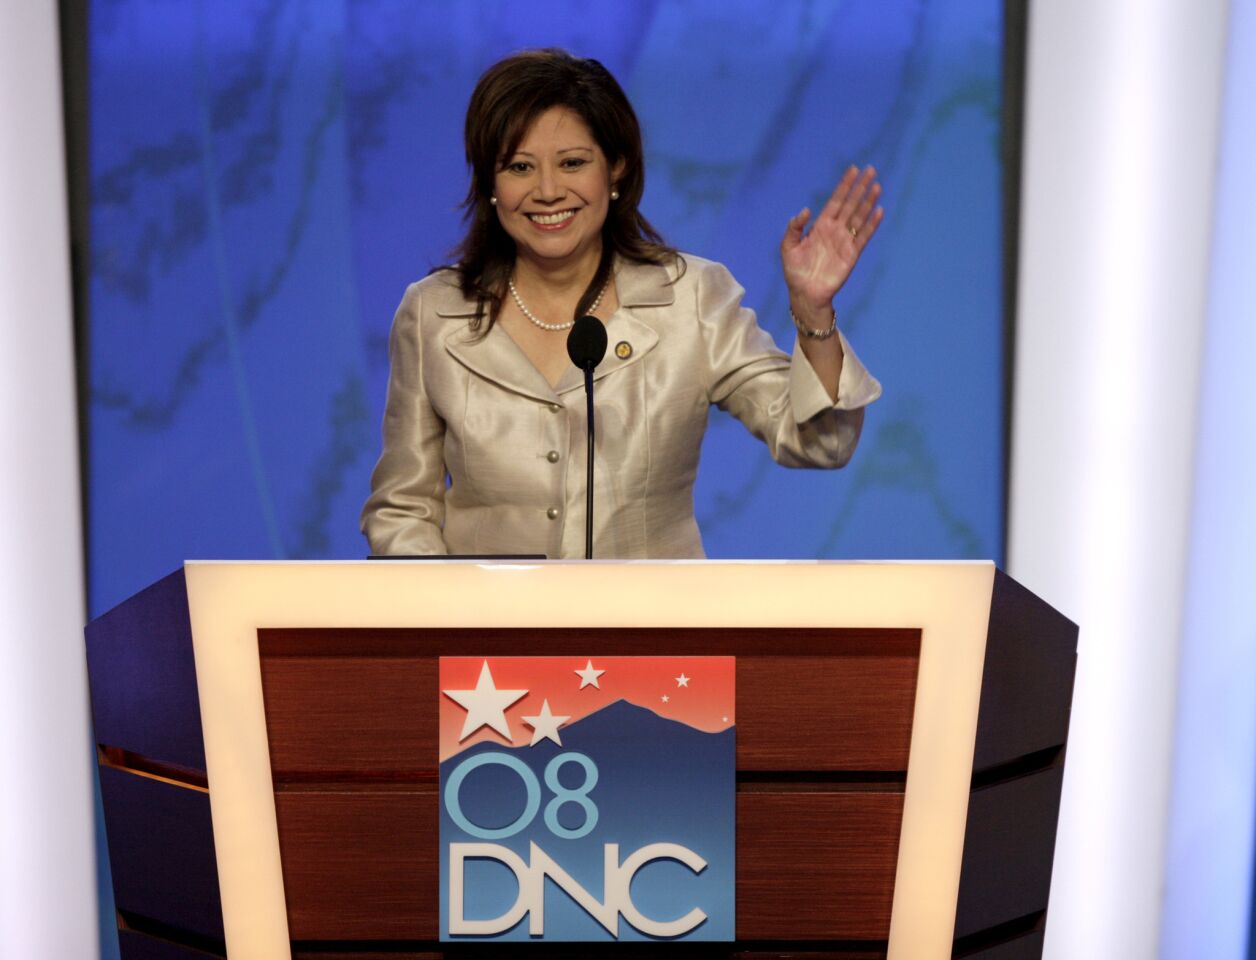 Former Rep. Hilda Solis, (D-Calif.), was President Obama's Labor secretary from 2009 until 2013 and the first Latina in the cabinet. Solis has since expressed interest in running for a seat in the Los Angeles County Board of Supervisors in 2014.